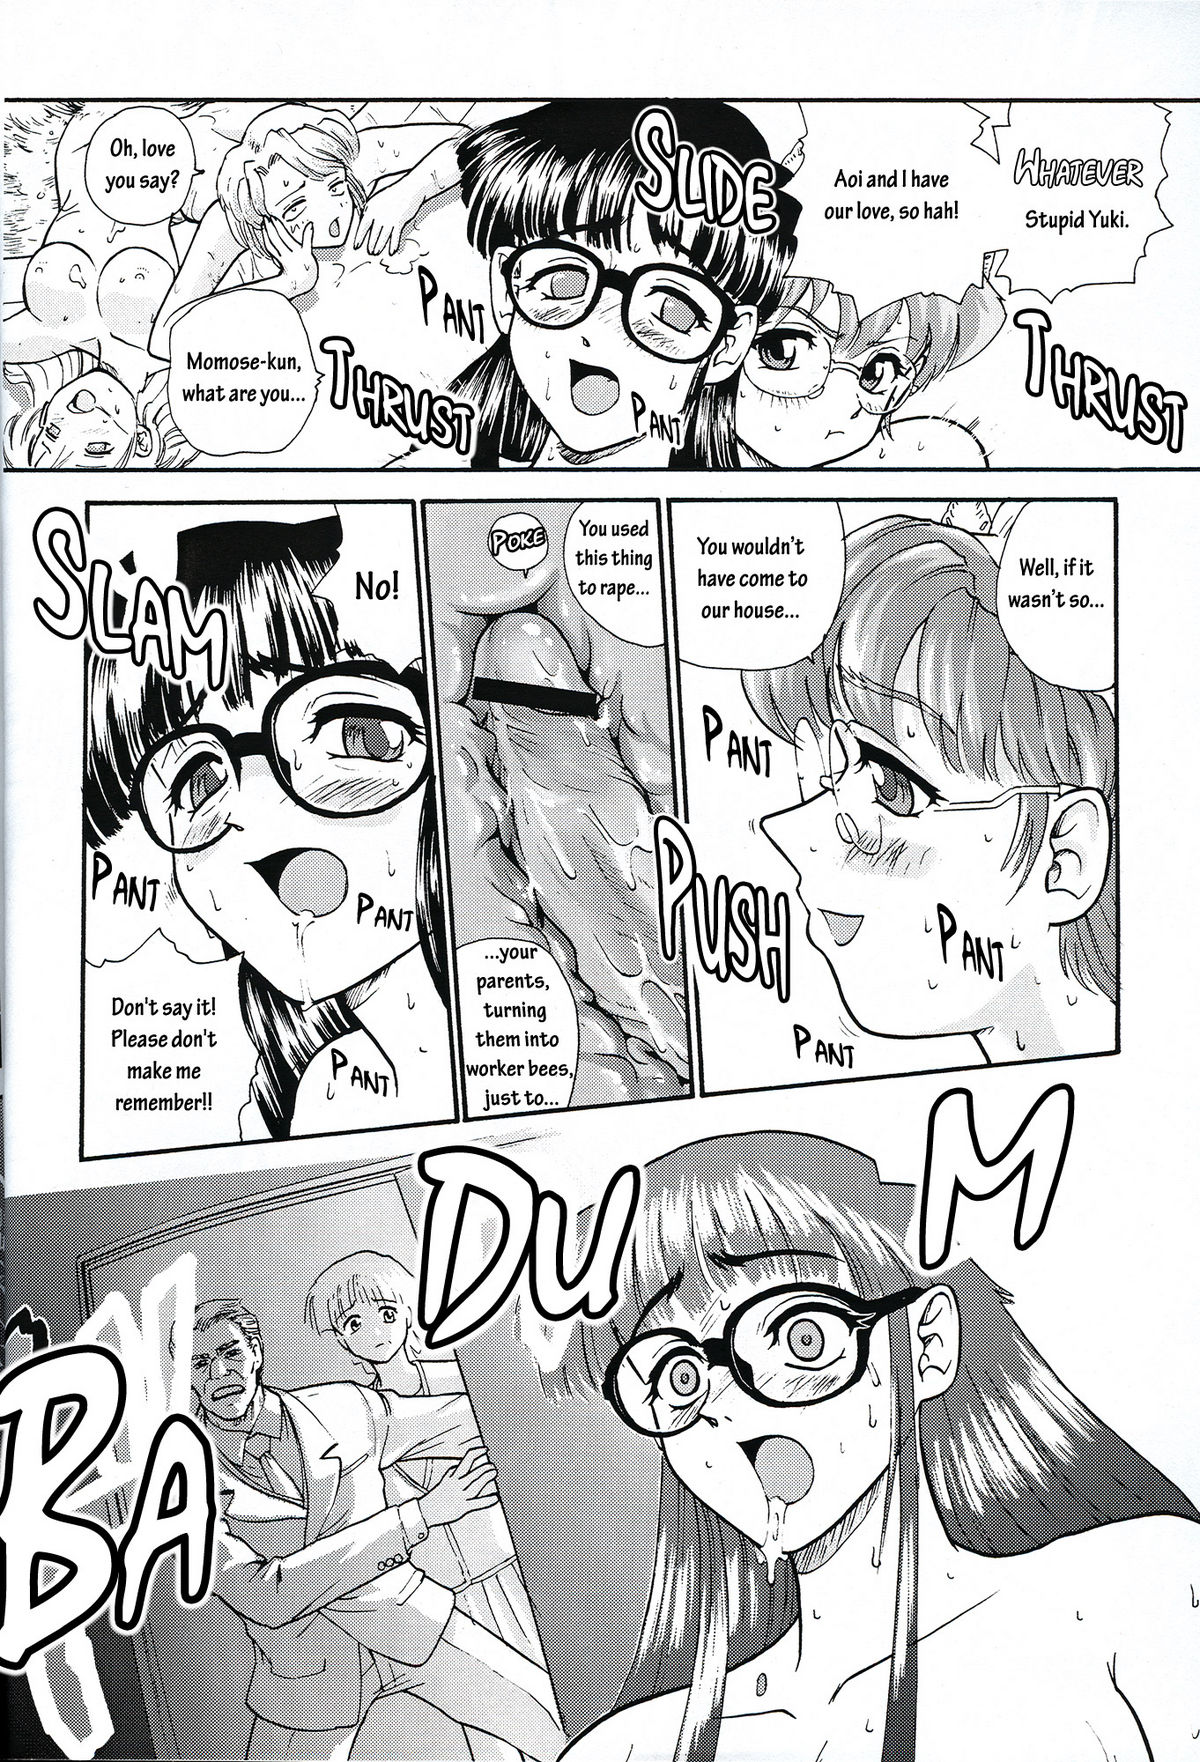 (SC19) [Behind Moon (Q)] Dulce Report 3 [English] page 19 full